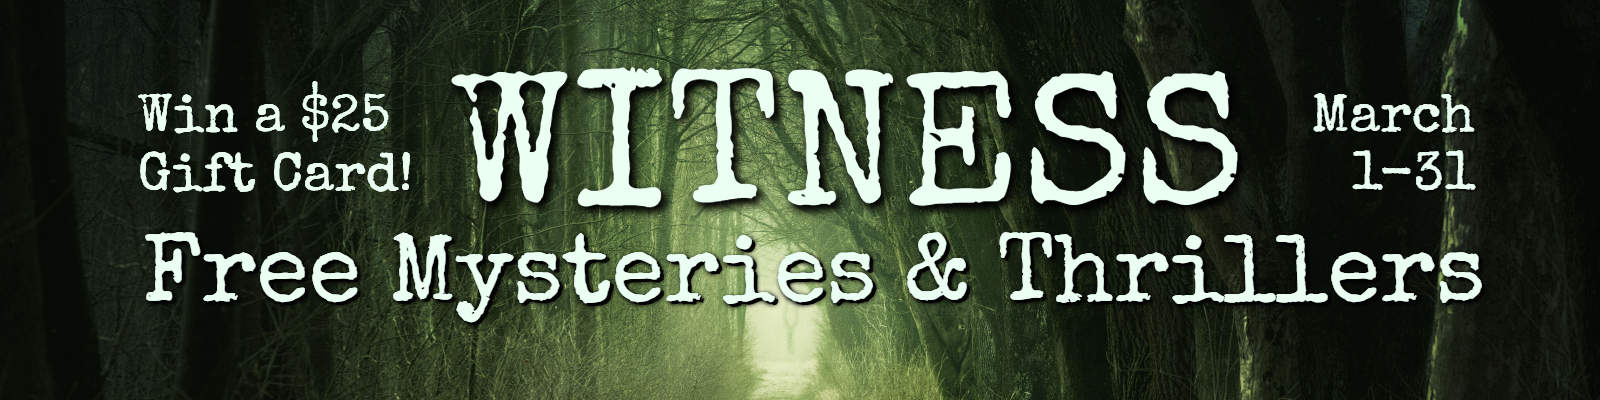 Witness Mysteries and Thrillers